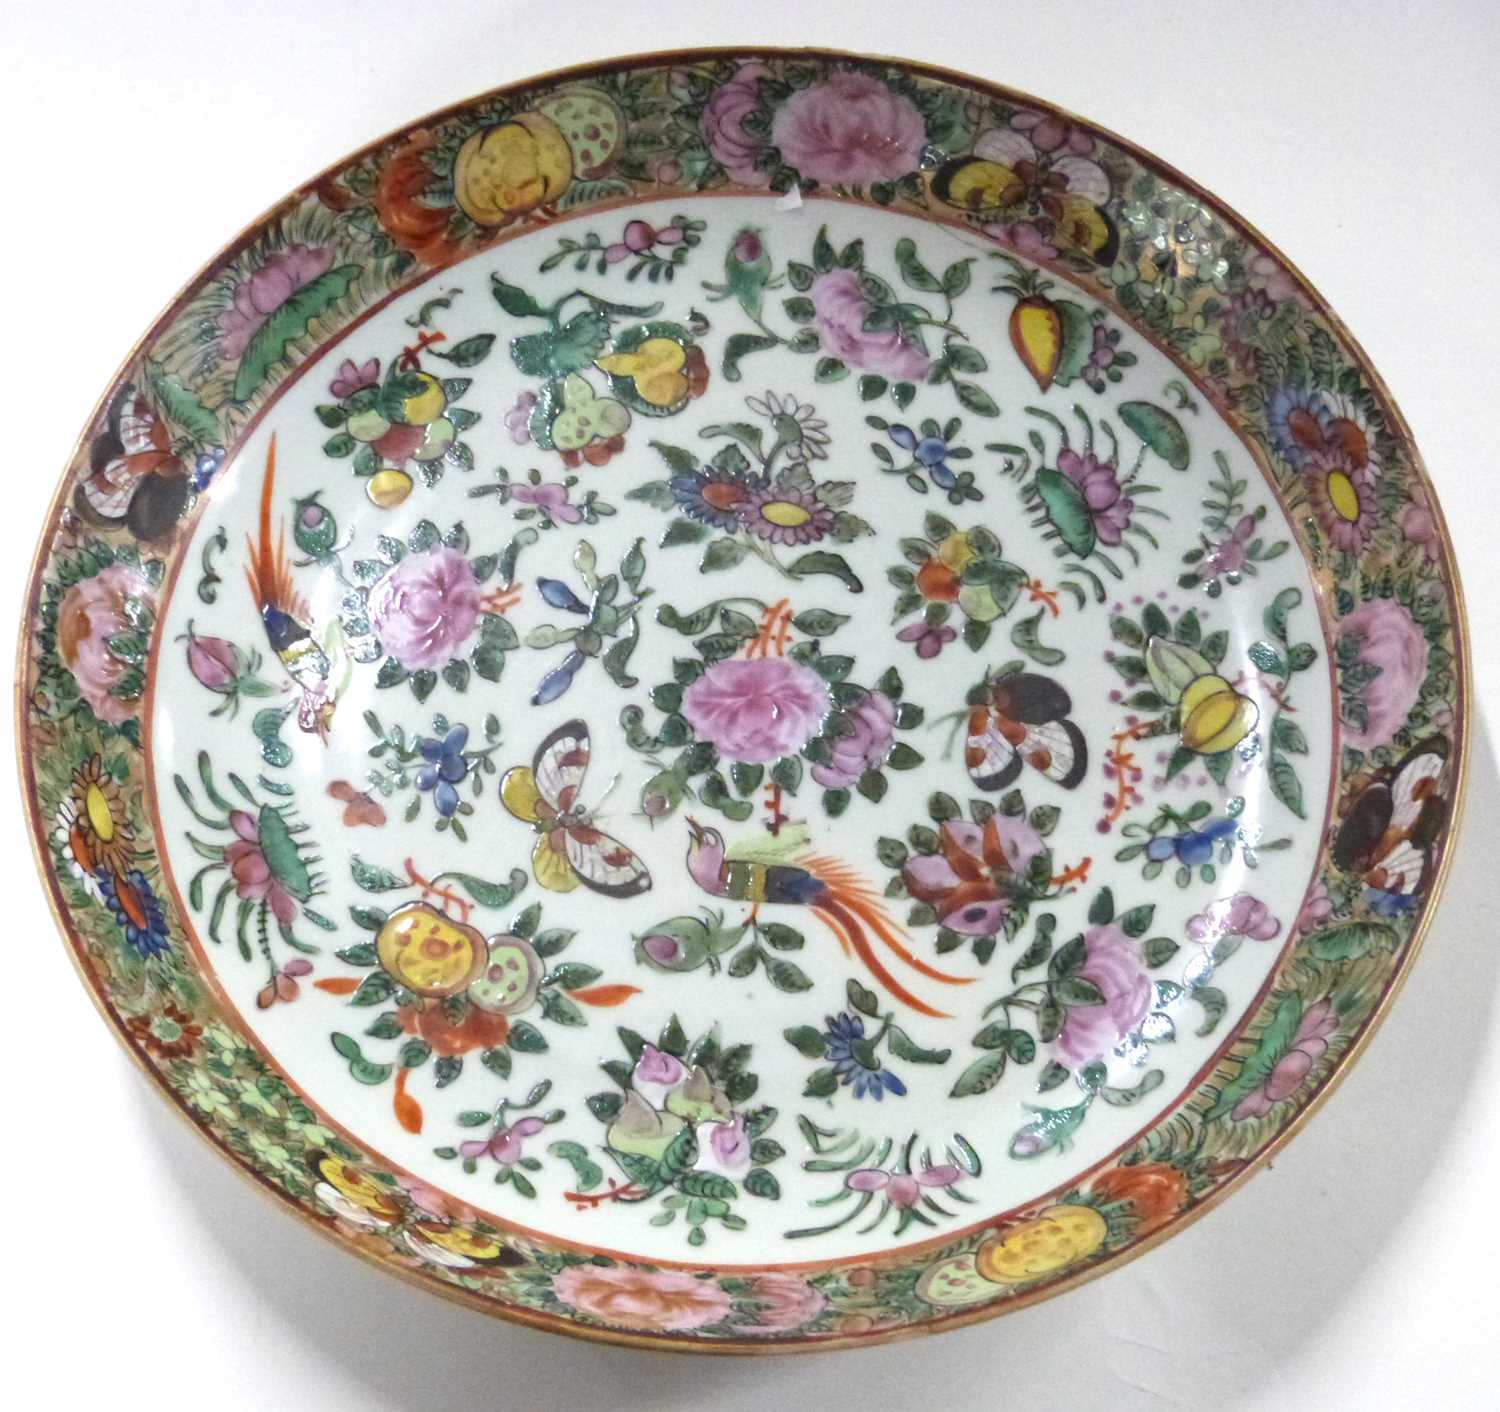 Cantonese porcelain dish with polychrome decoration of flowers and butterflies and birds amongst